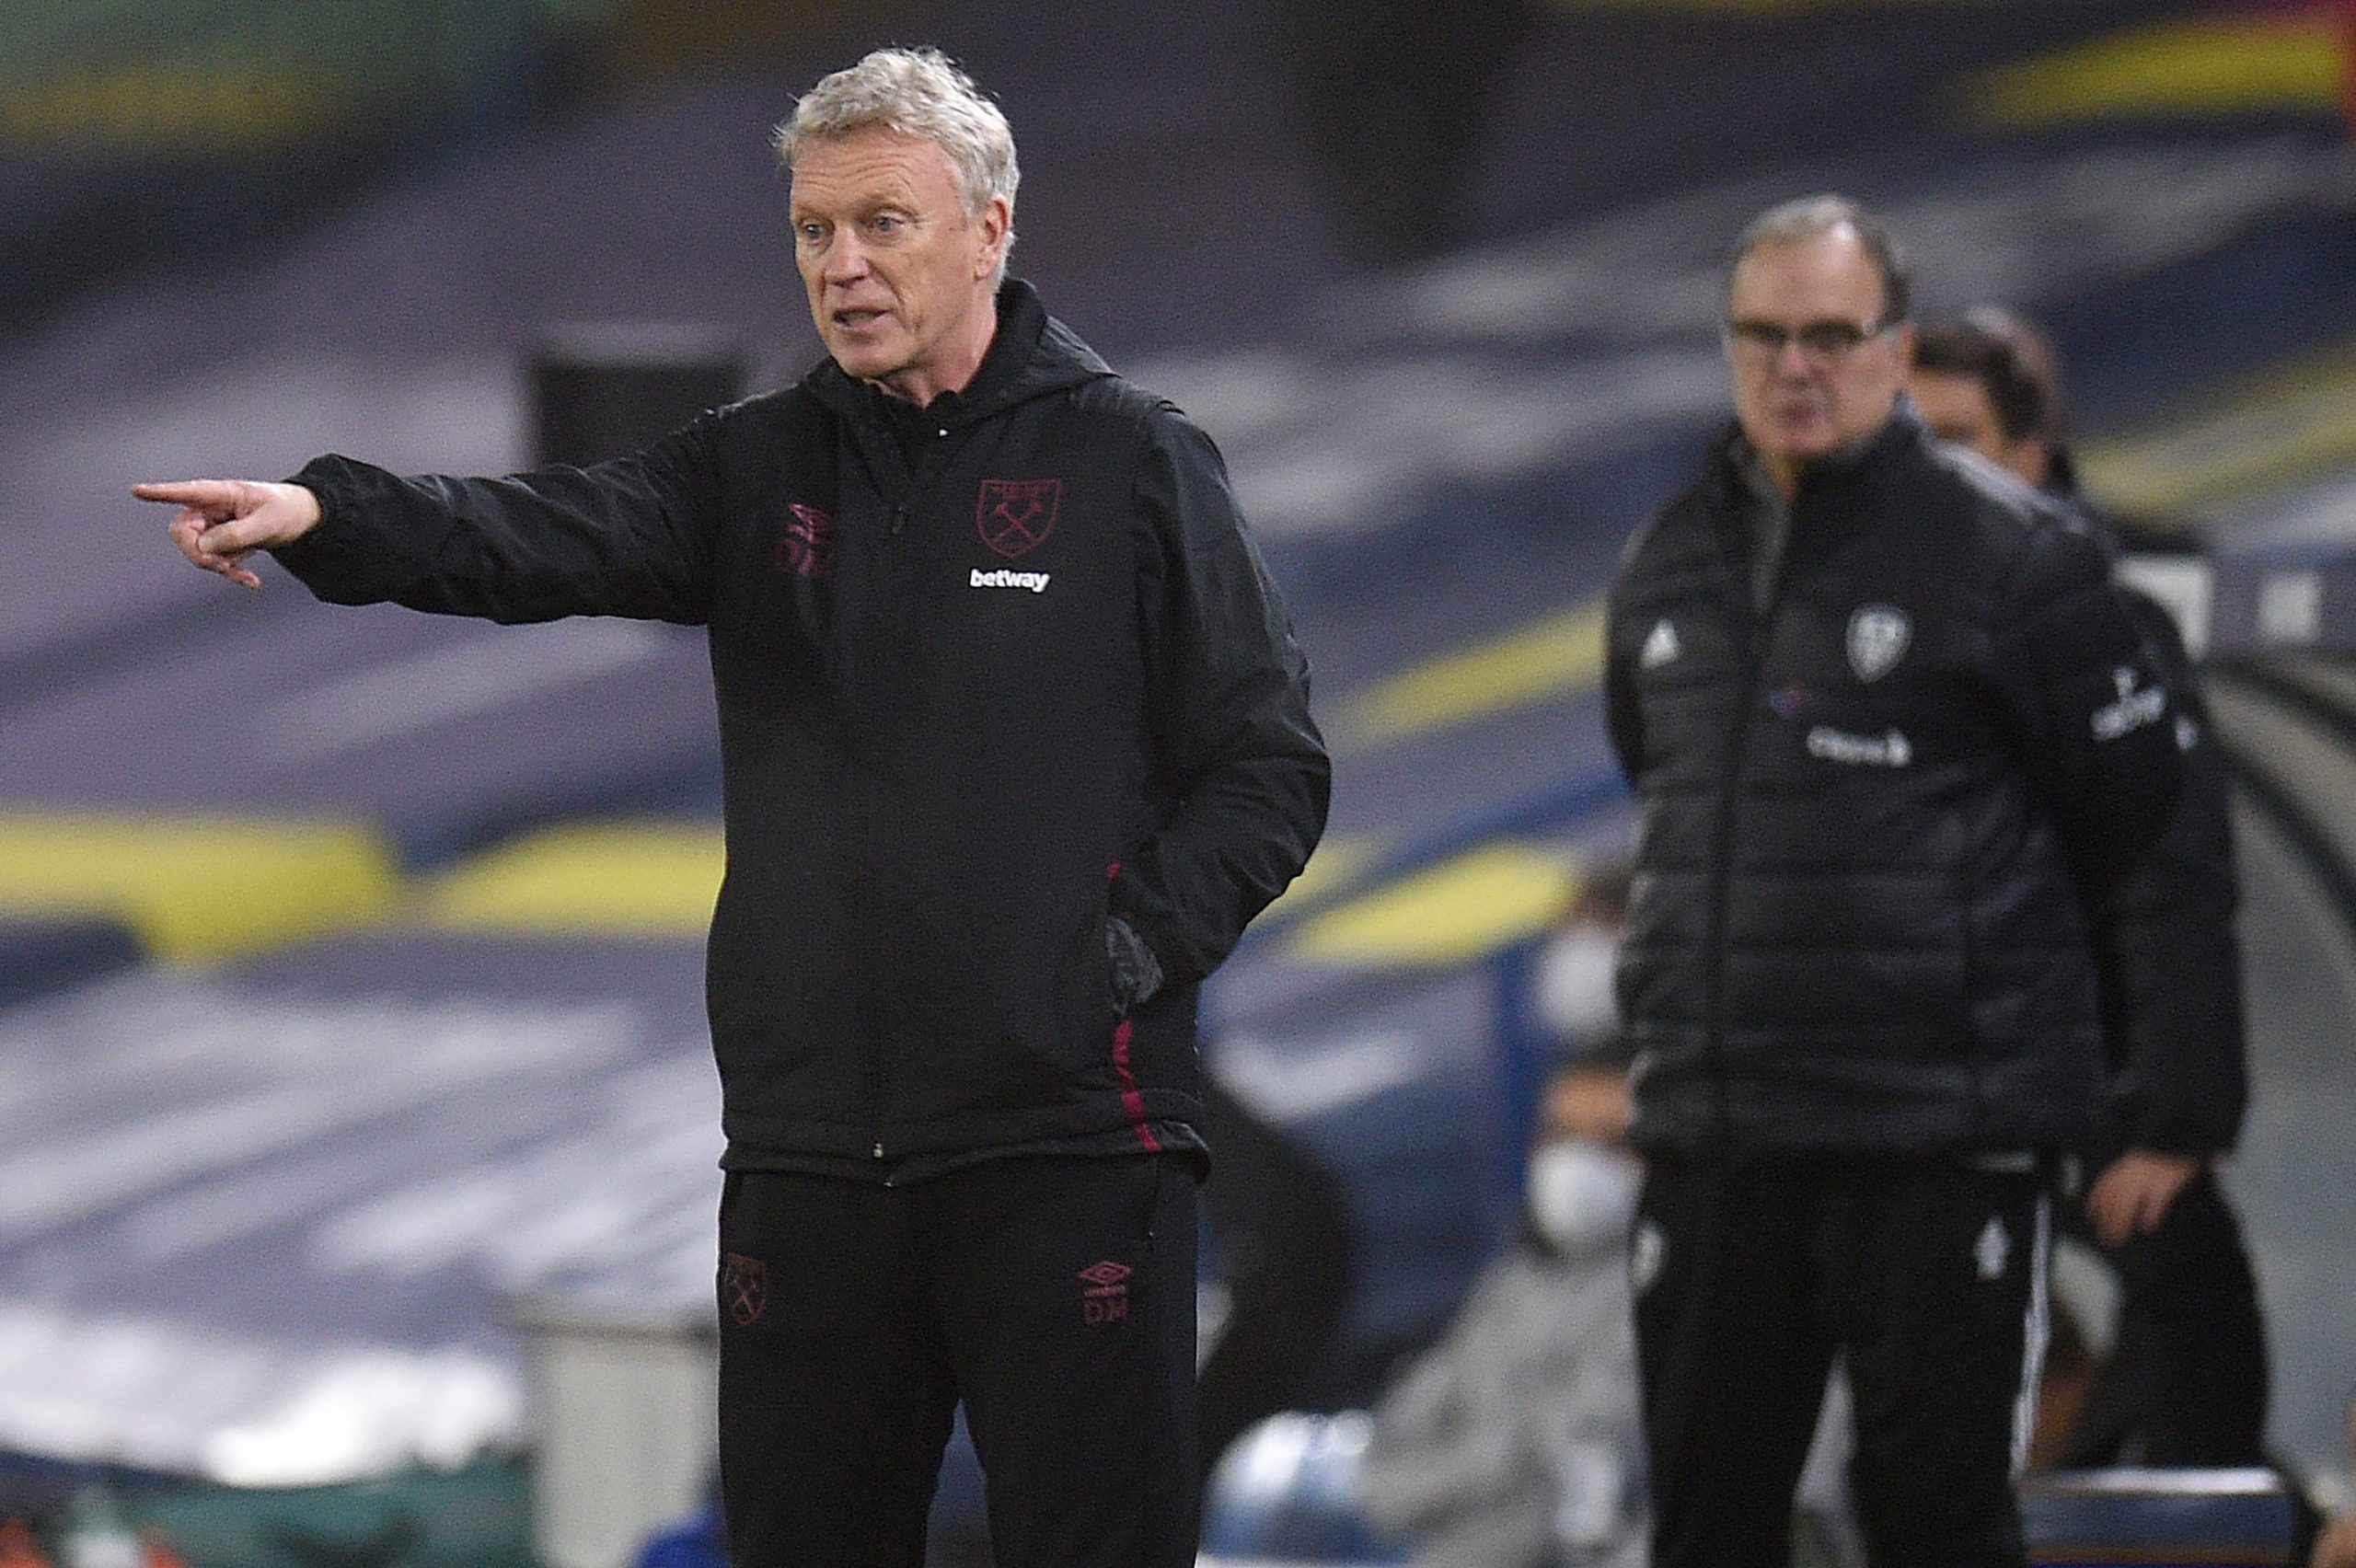 West Ham boss David Moyes leaps to the defence of Leeds manager Marcelo Bielsa and says he always knew he was special